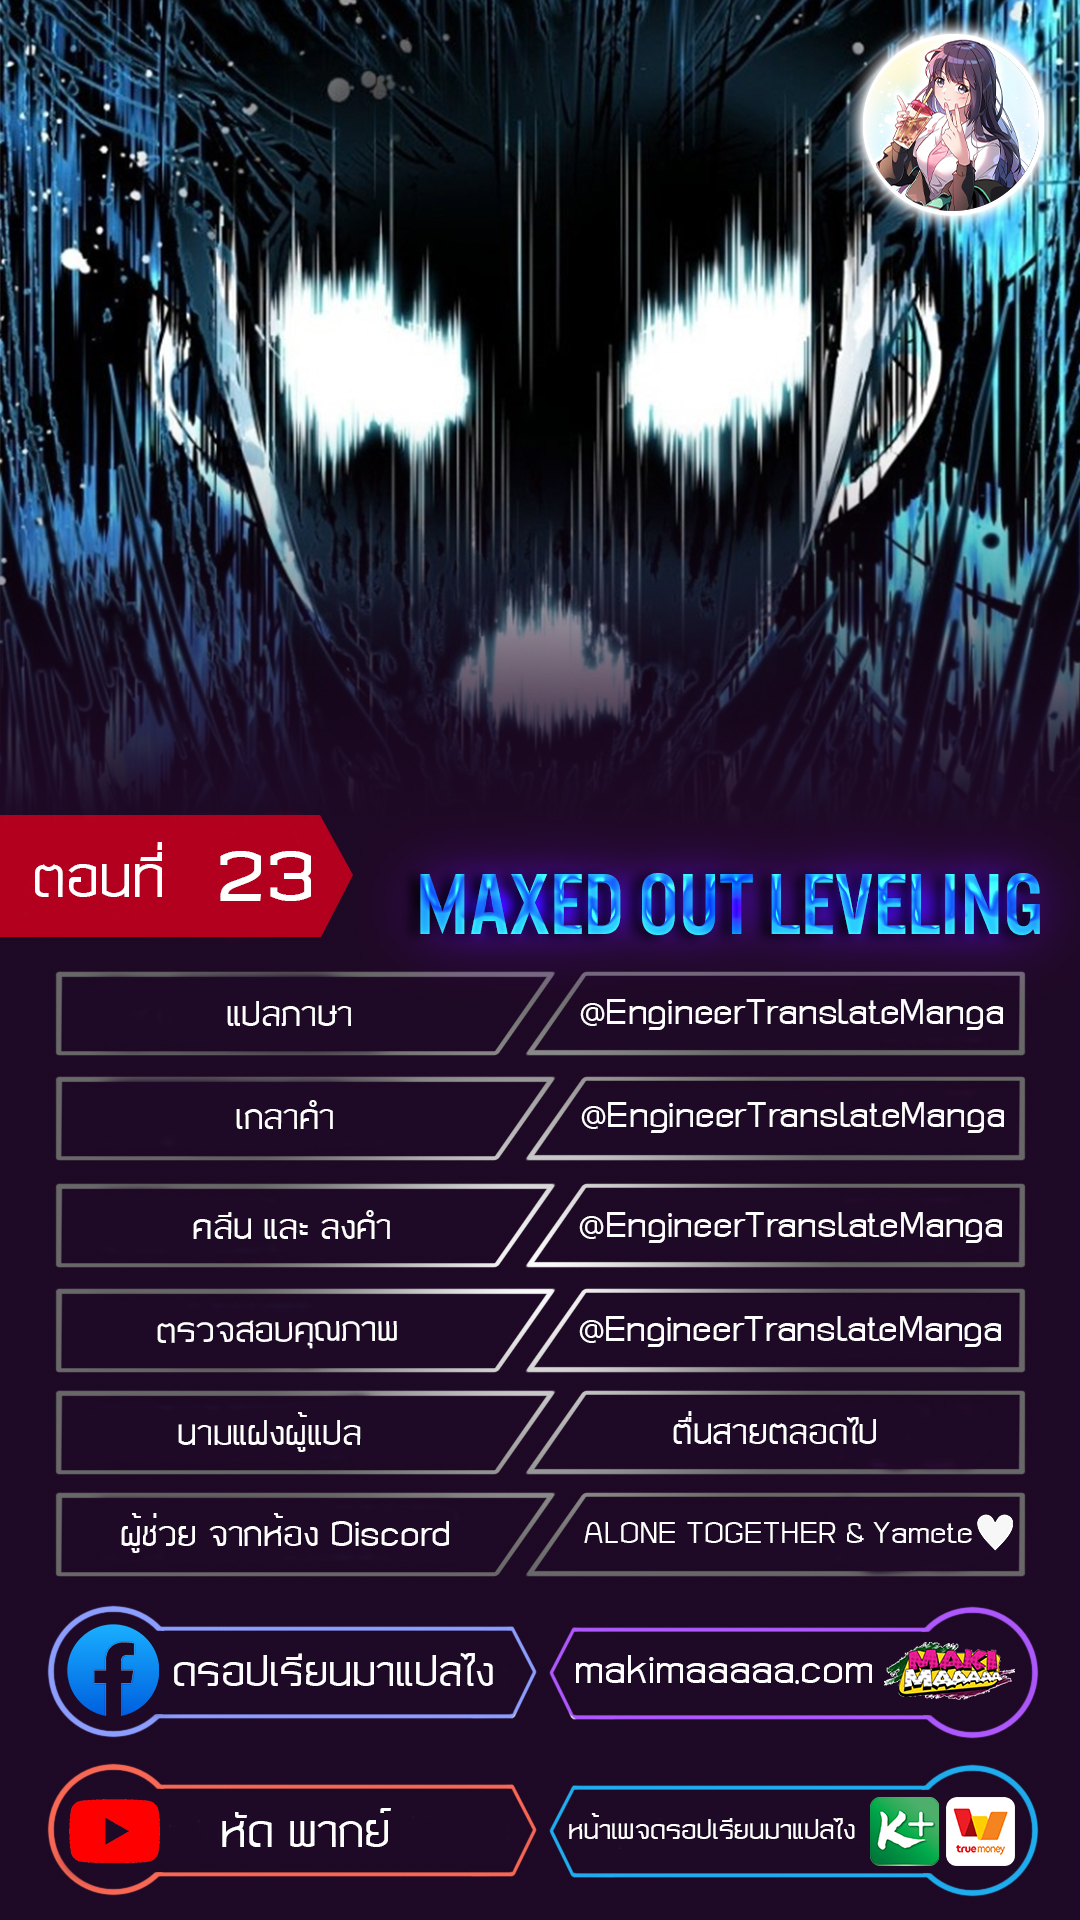 Maxed Out Leveling23 01